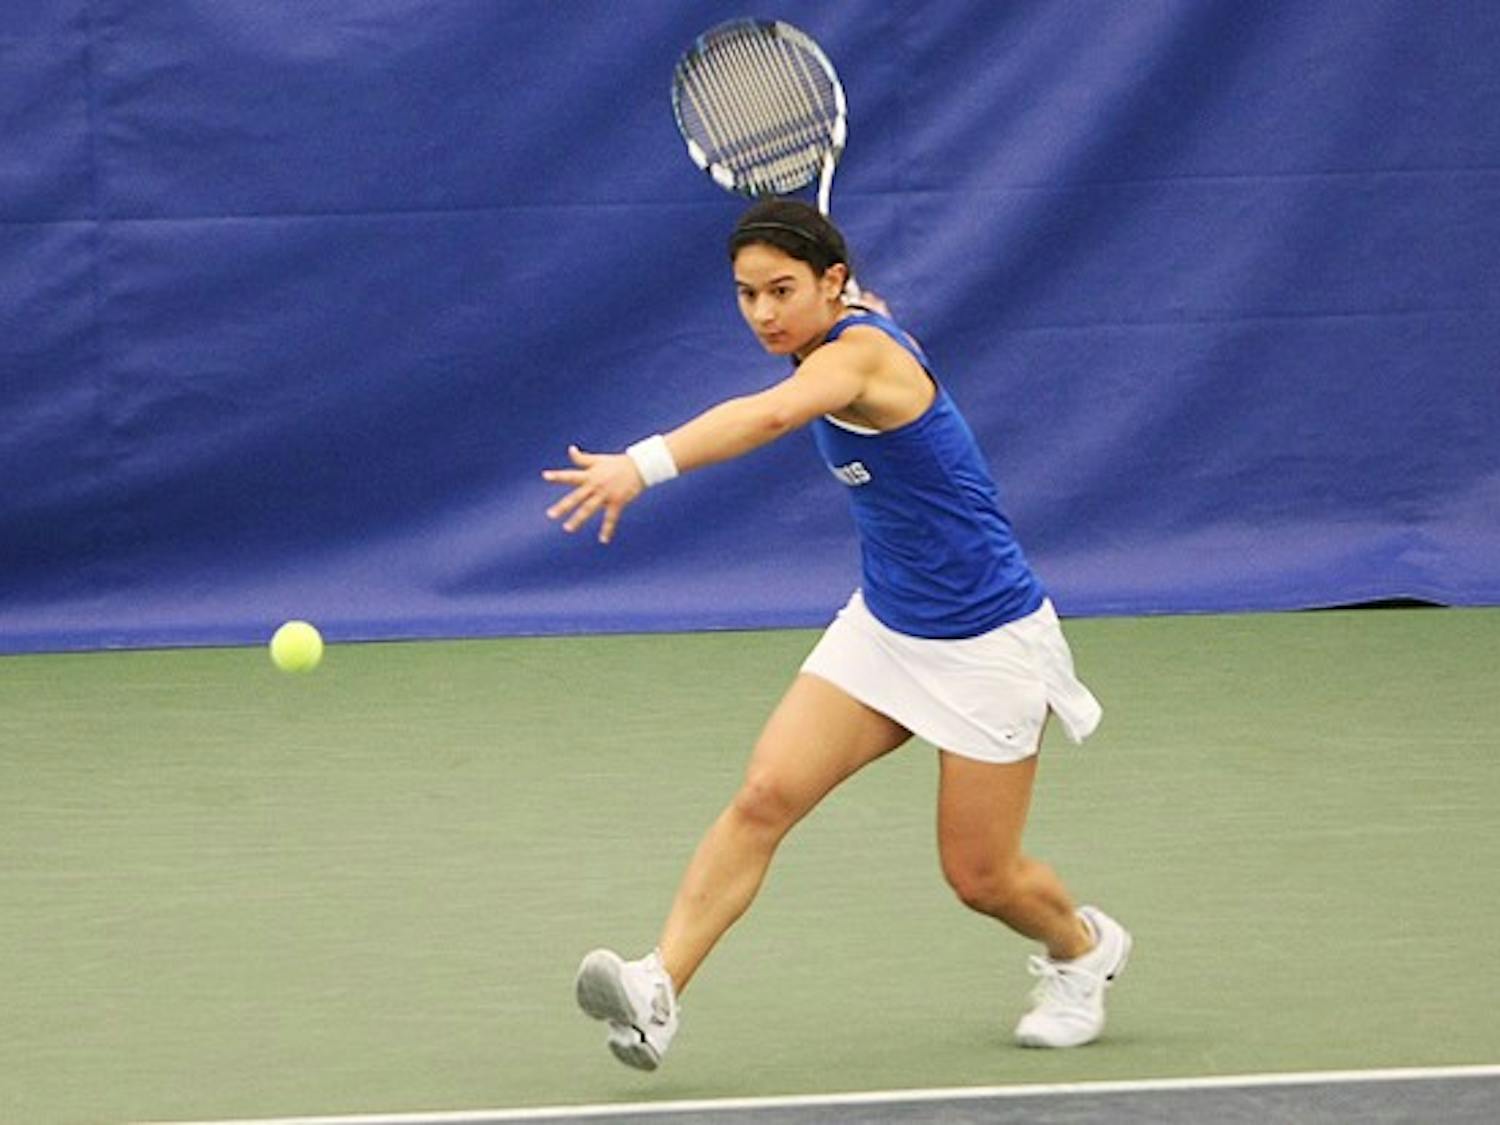 Junior Hanna Mar, who is currently ranked 25th nationally, boasts a 7-5 singles record in dual matches this season.